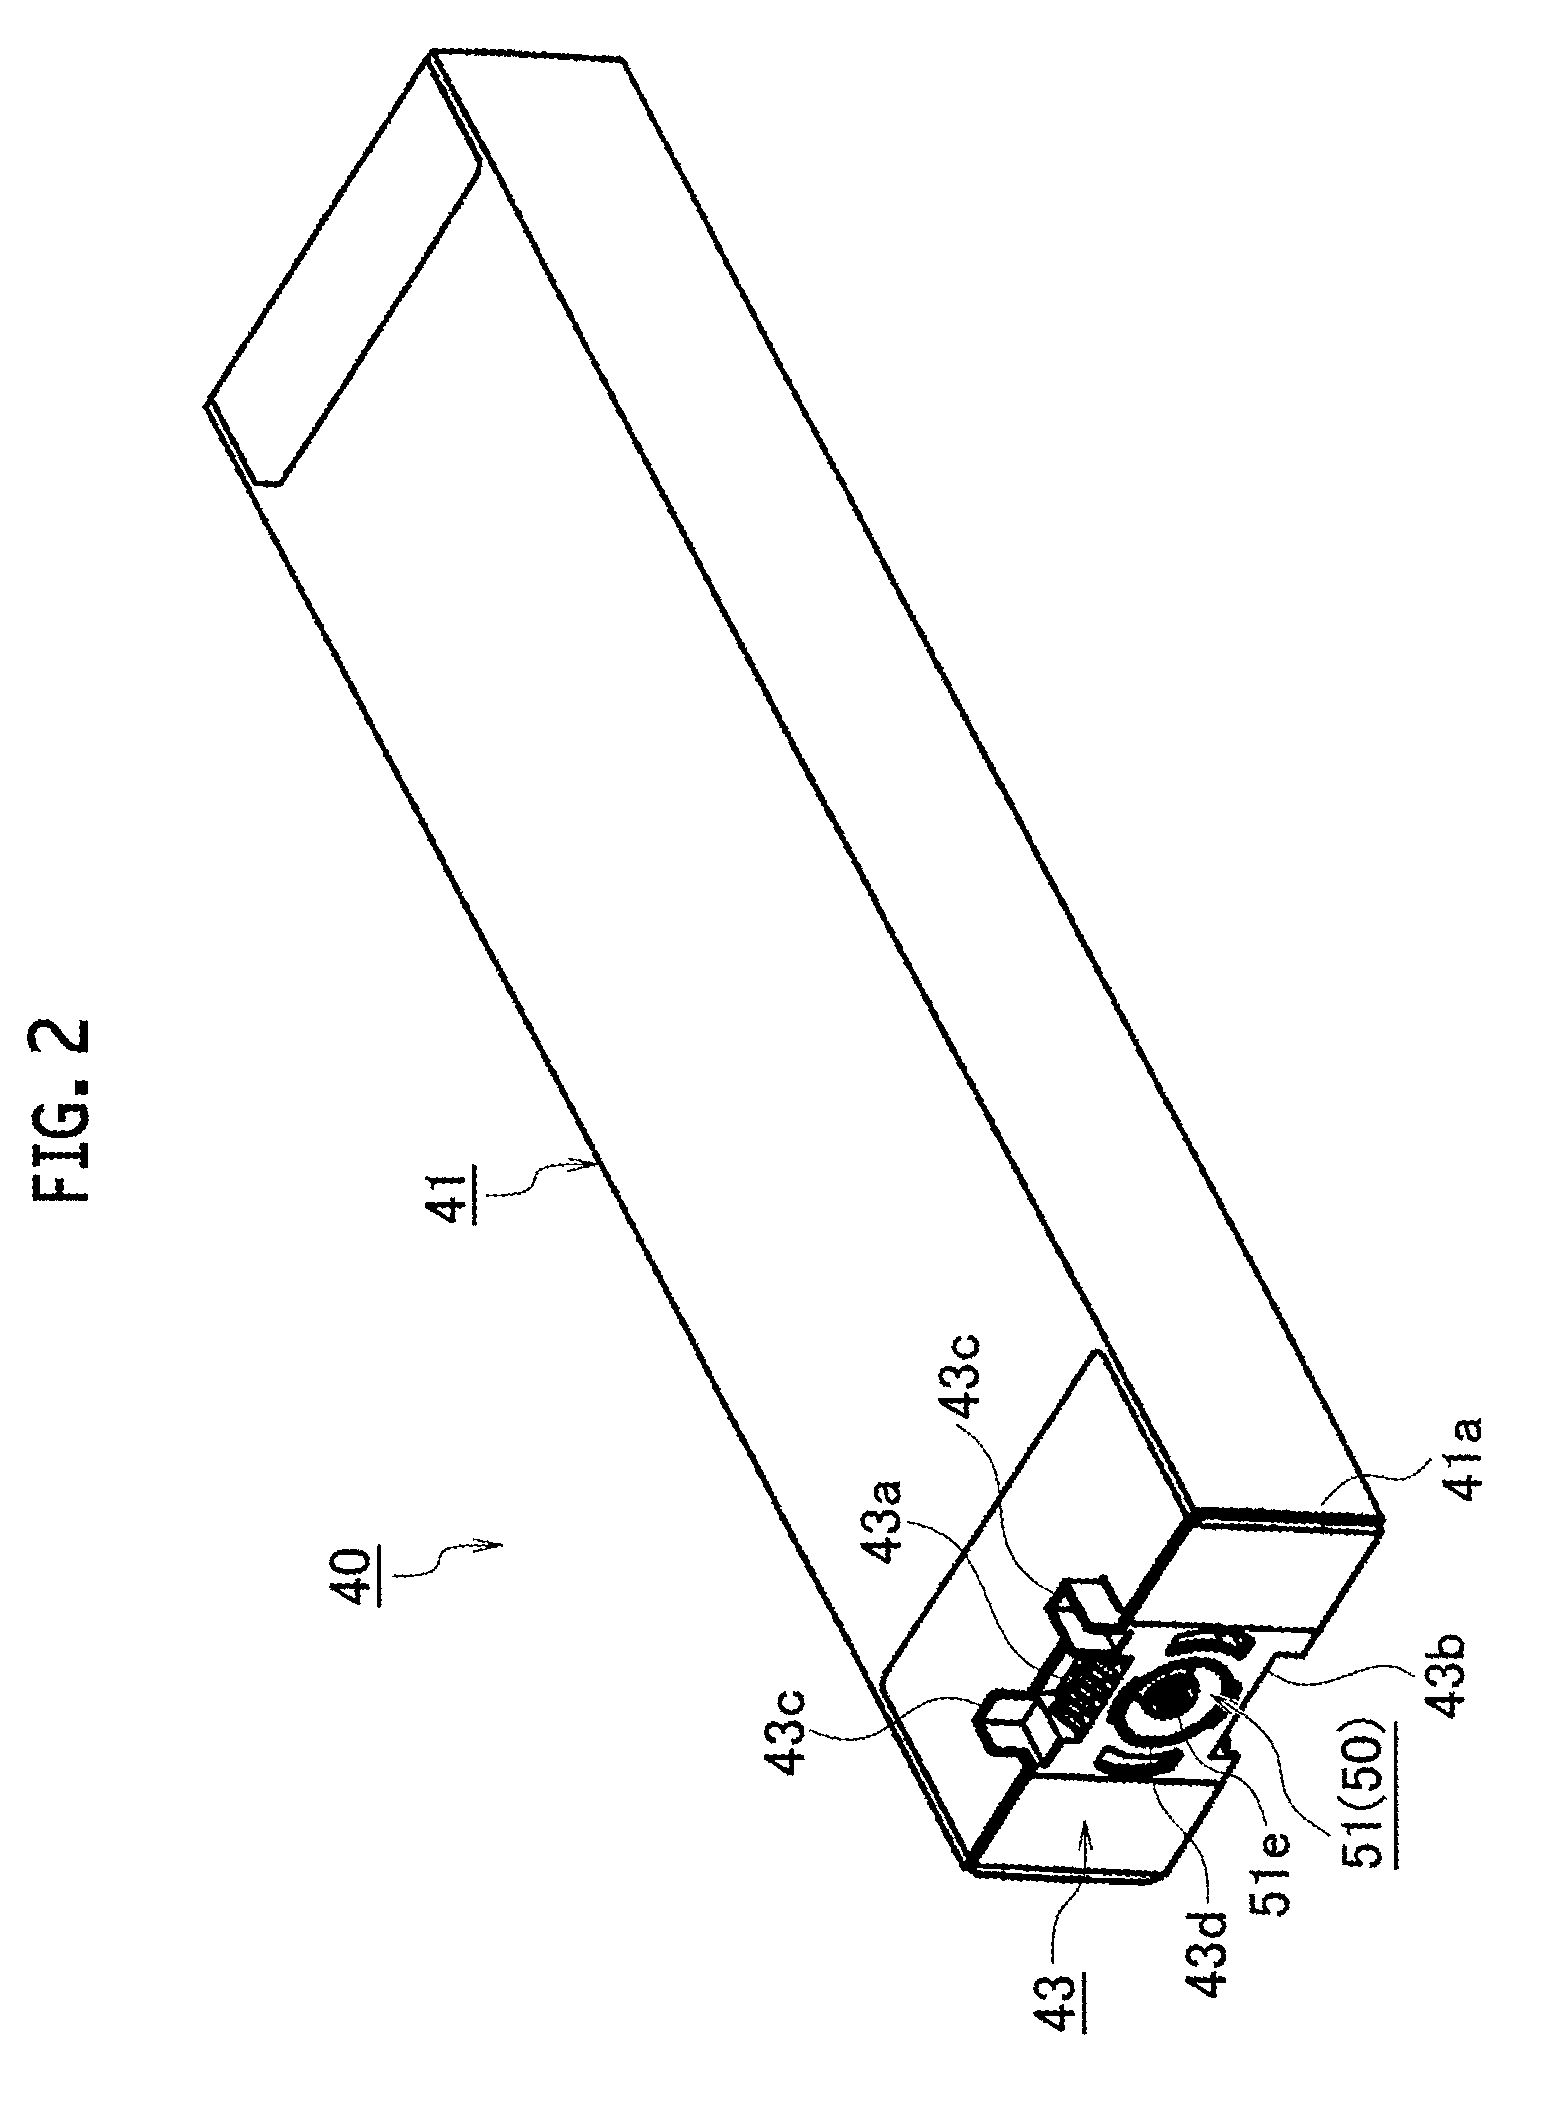 Ink cartridge and mount/demount mechanism for the same